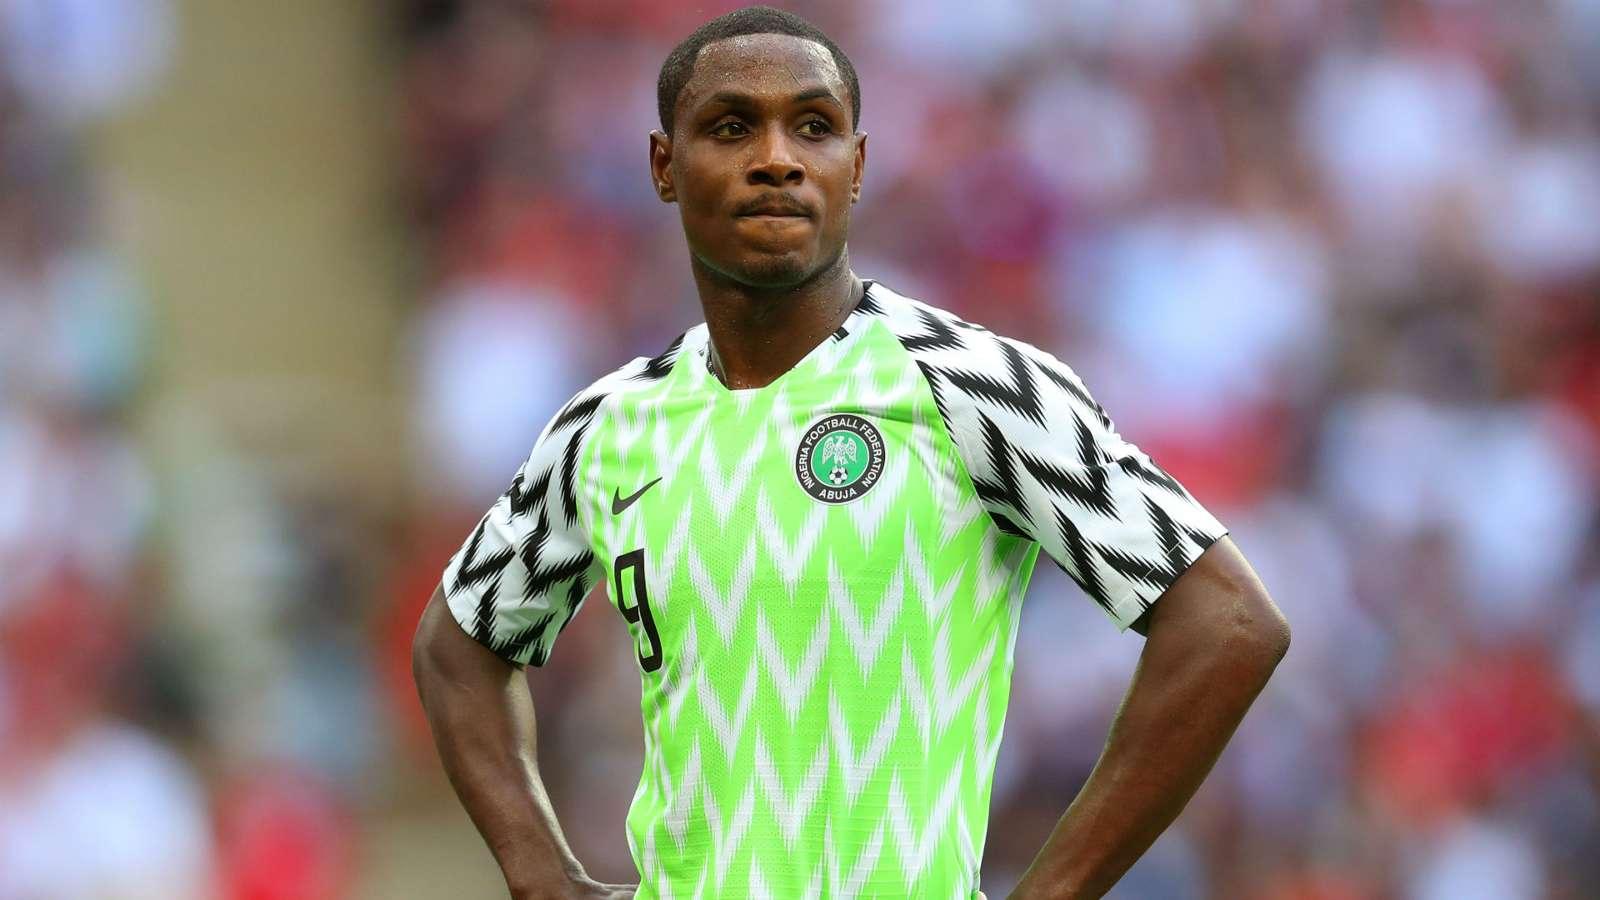 Ighalo won't make top 10 best paid players despite bumper pay rise